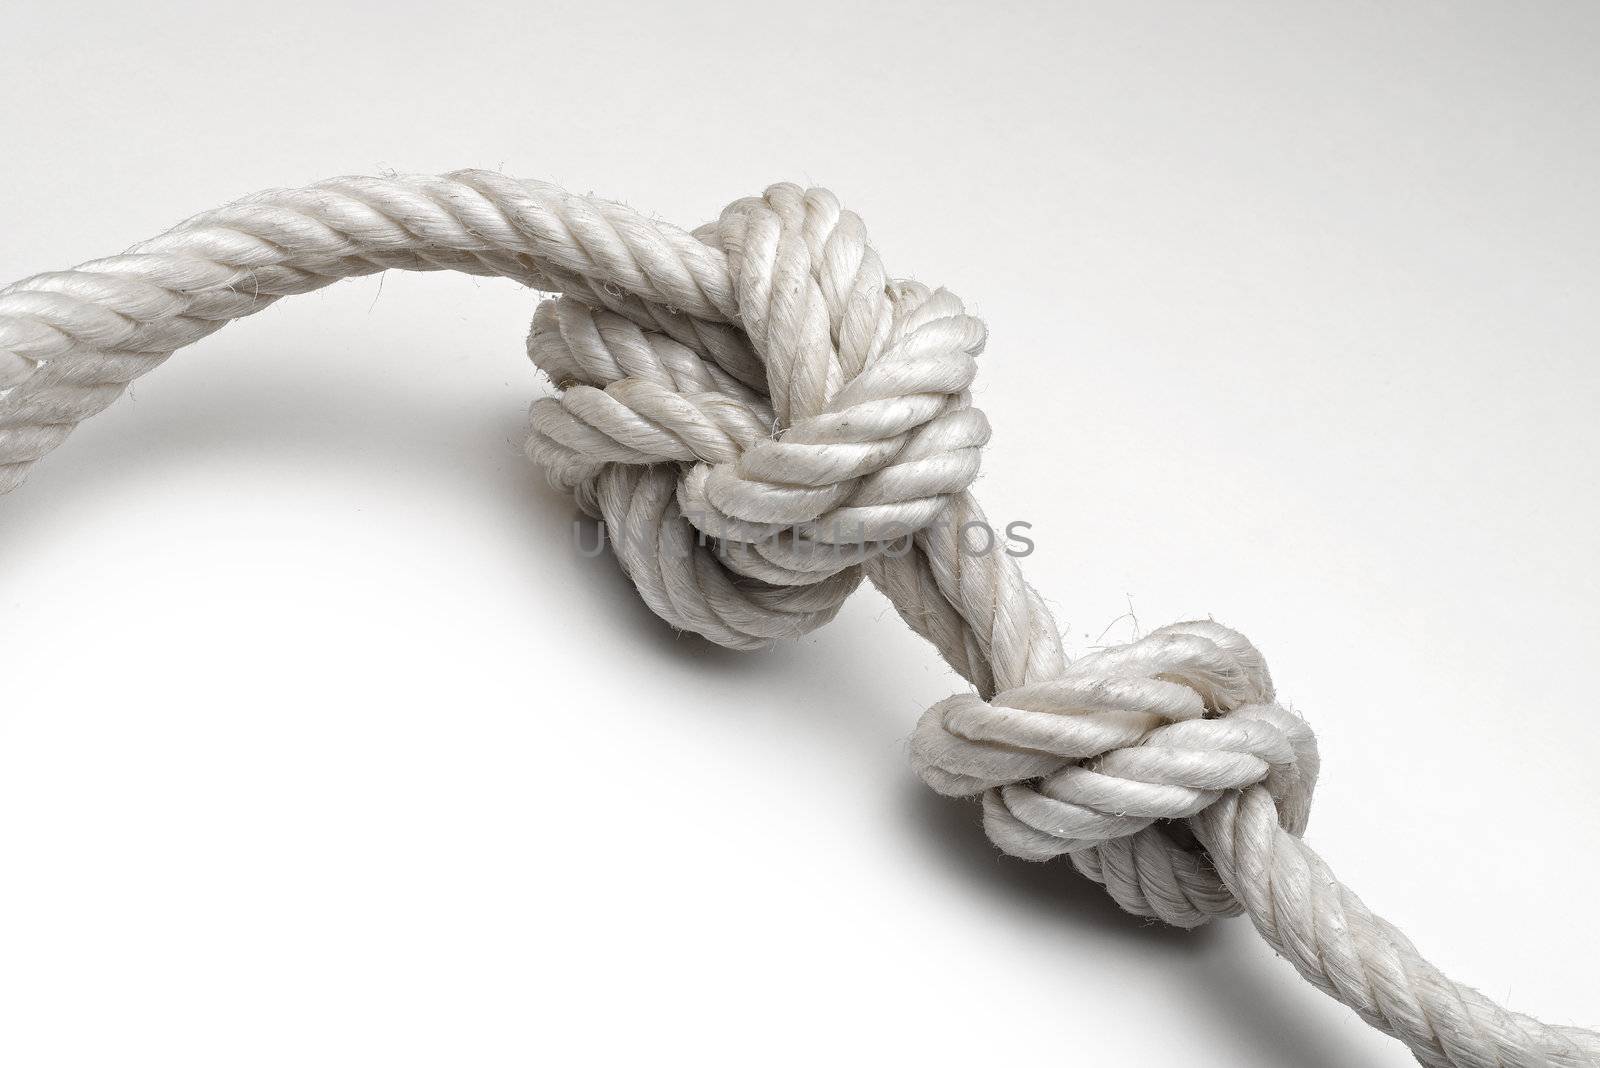 Rope with a knot on white background by pbombaert